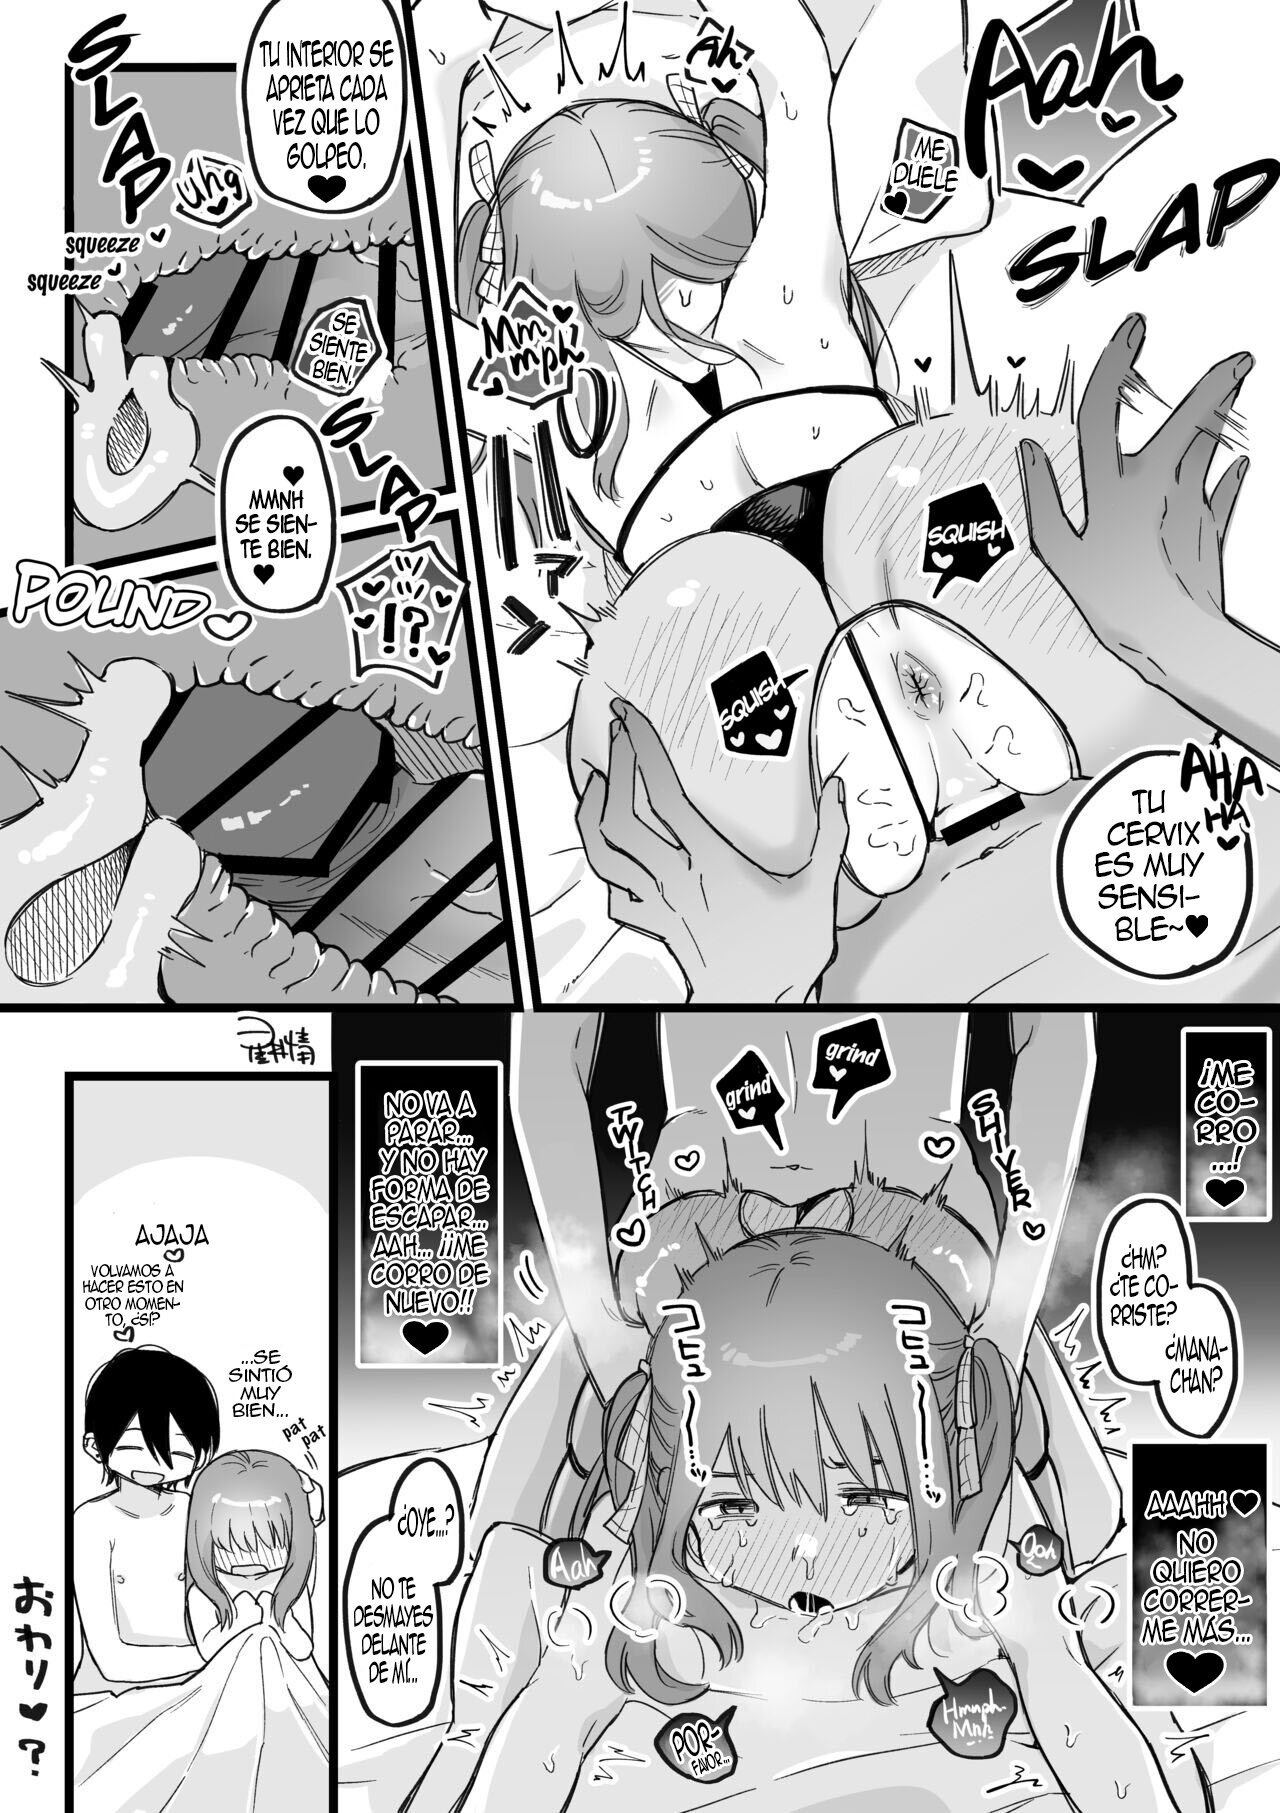 Hime chan Total Defeat and Hime chan Returns - 8